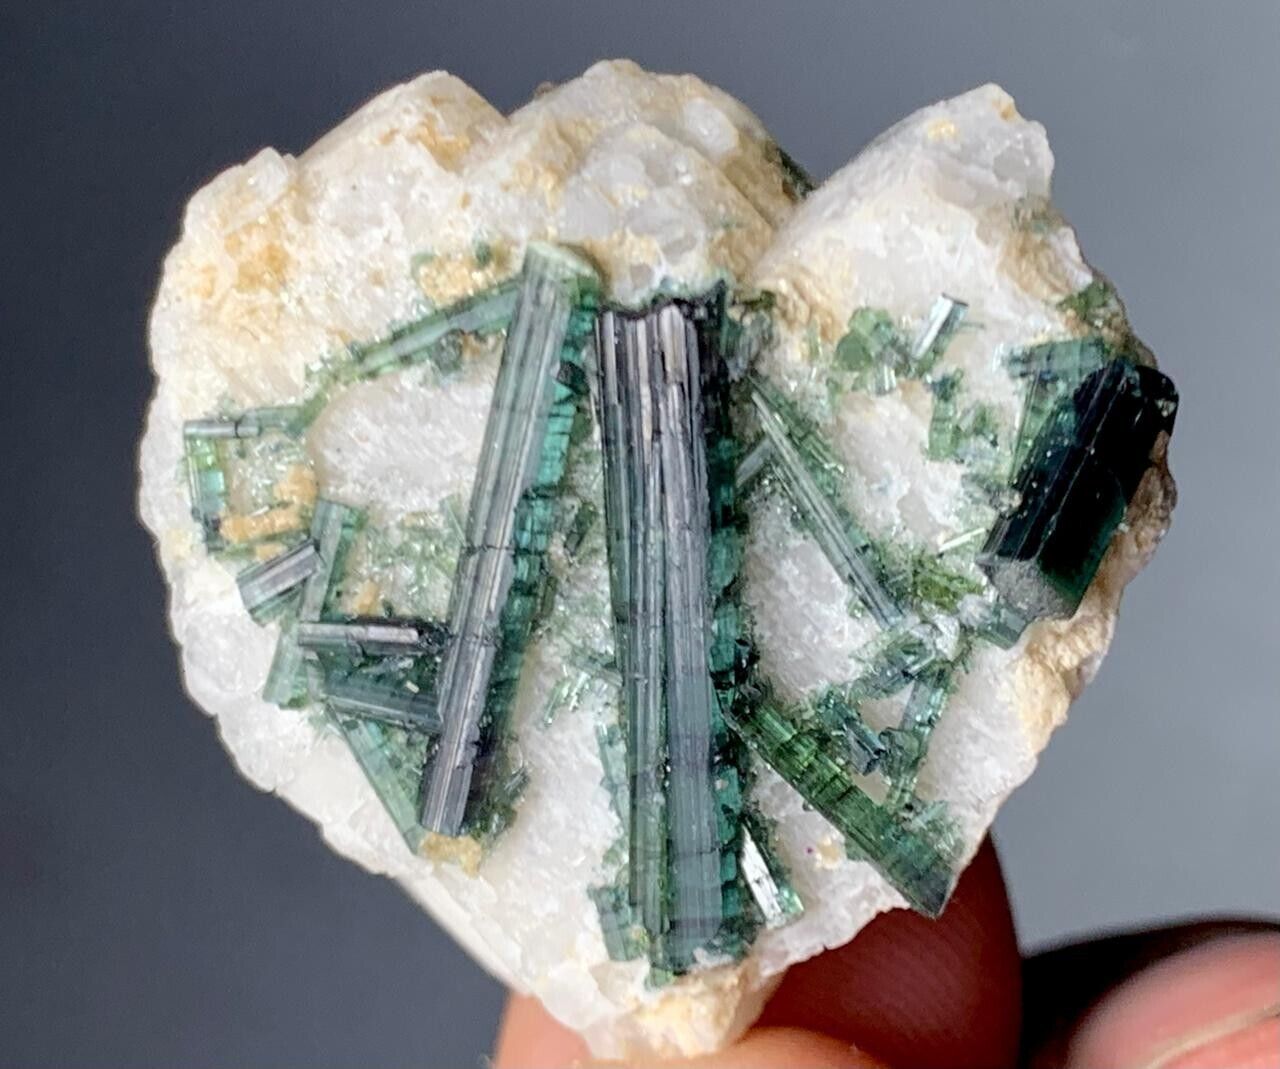 62 CT Indicolite Color Tourmaline Crystal  Combine With Quartz from Afghanistan